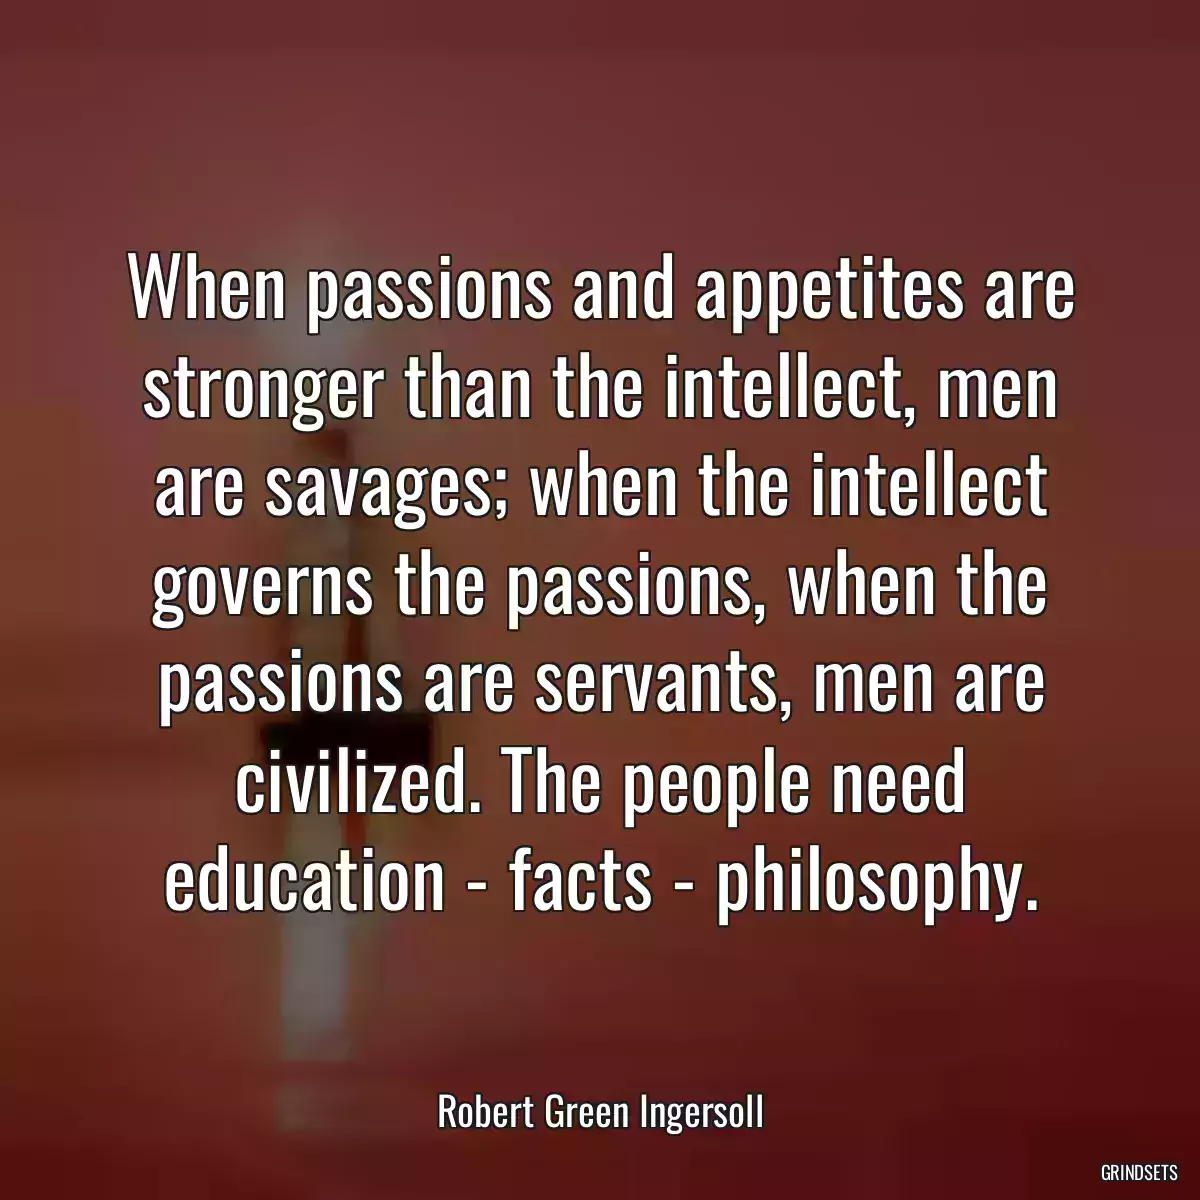 When passions and appetites are stronger than the intellect, men are savages; when the intellect governs the passions, when the passions are servants, men are civilized. The people need education - facts - philosophy.